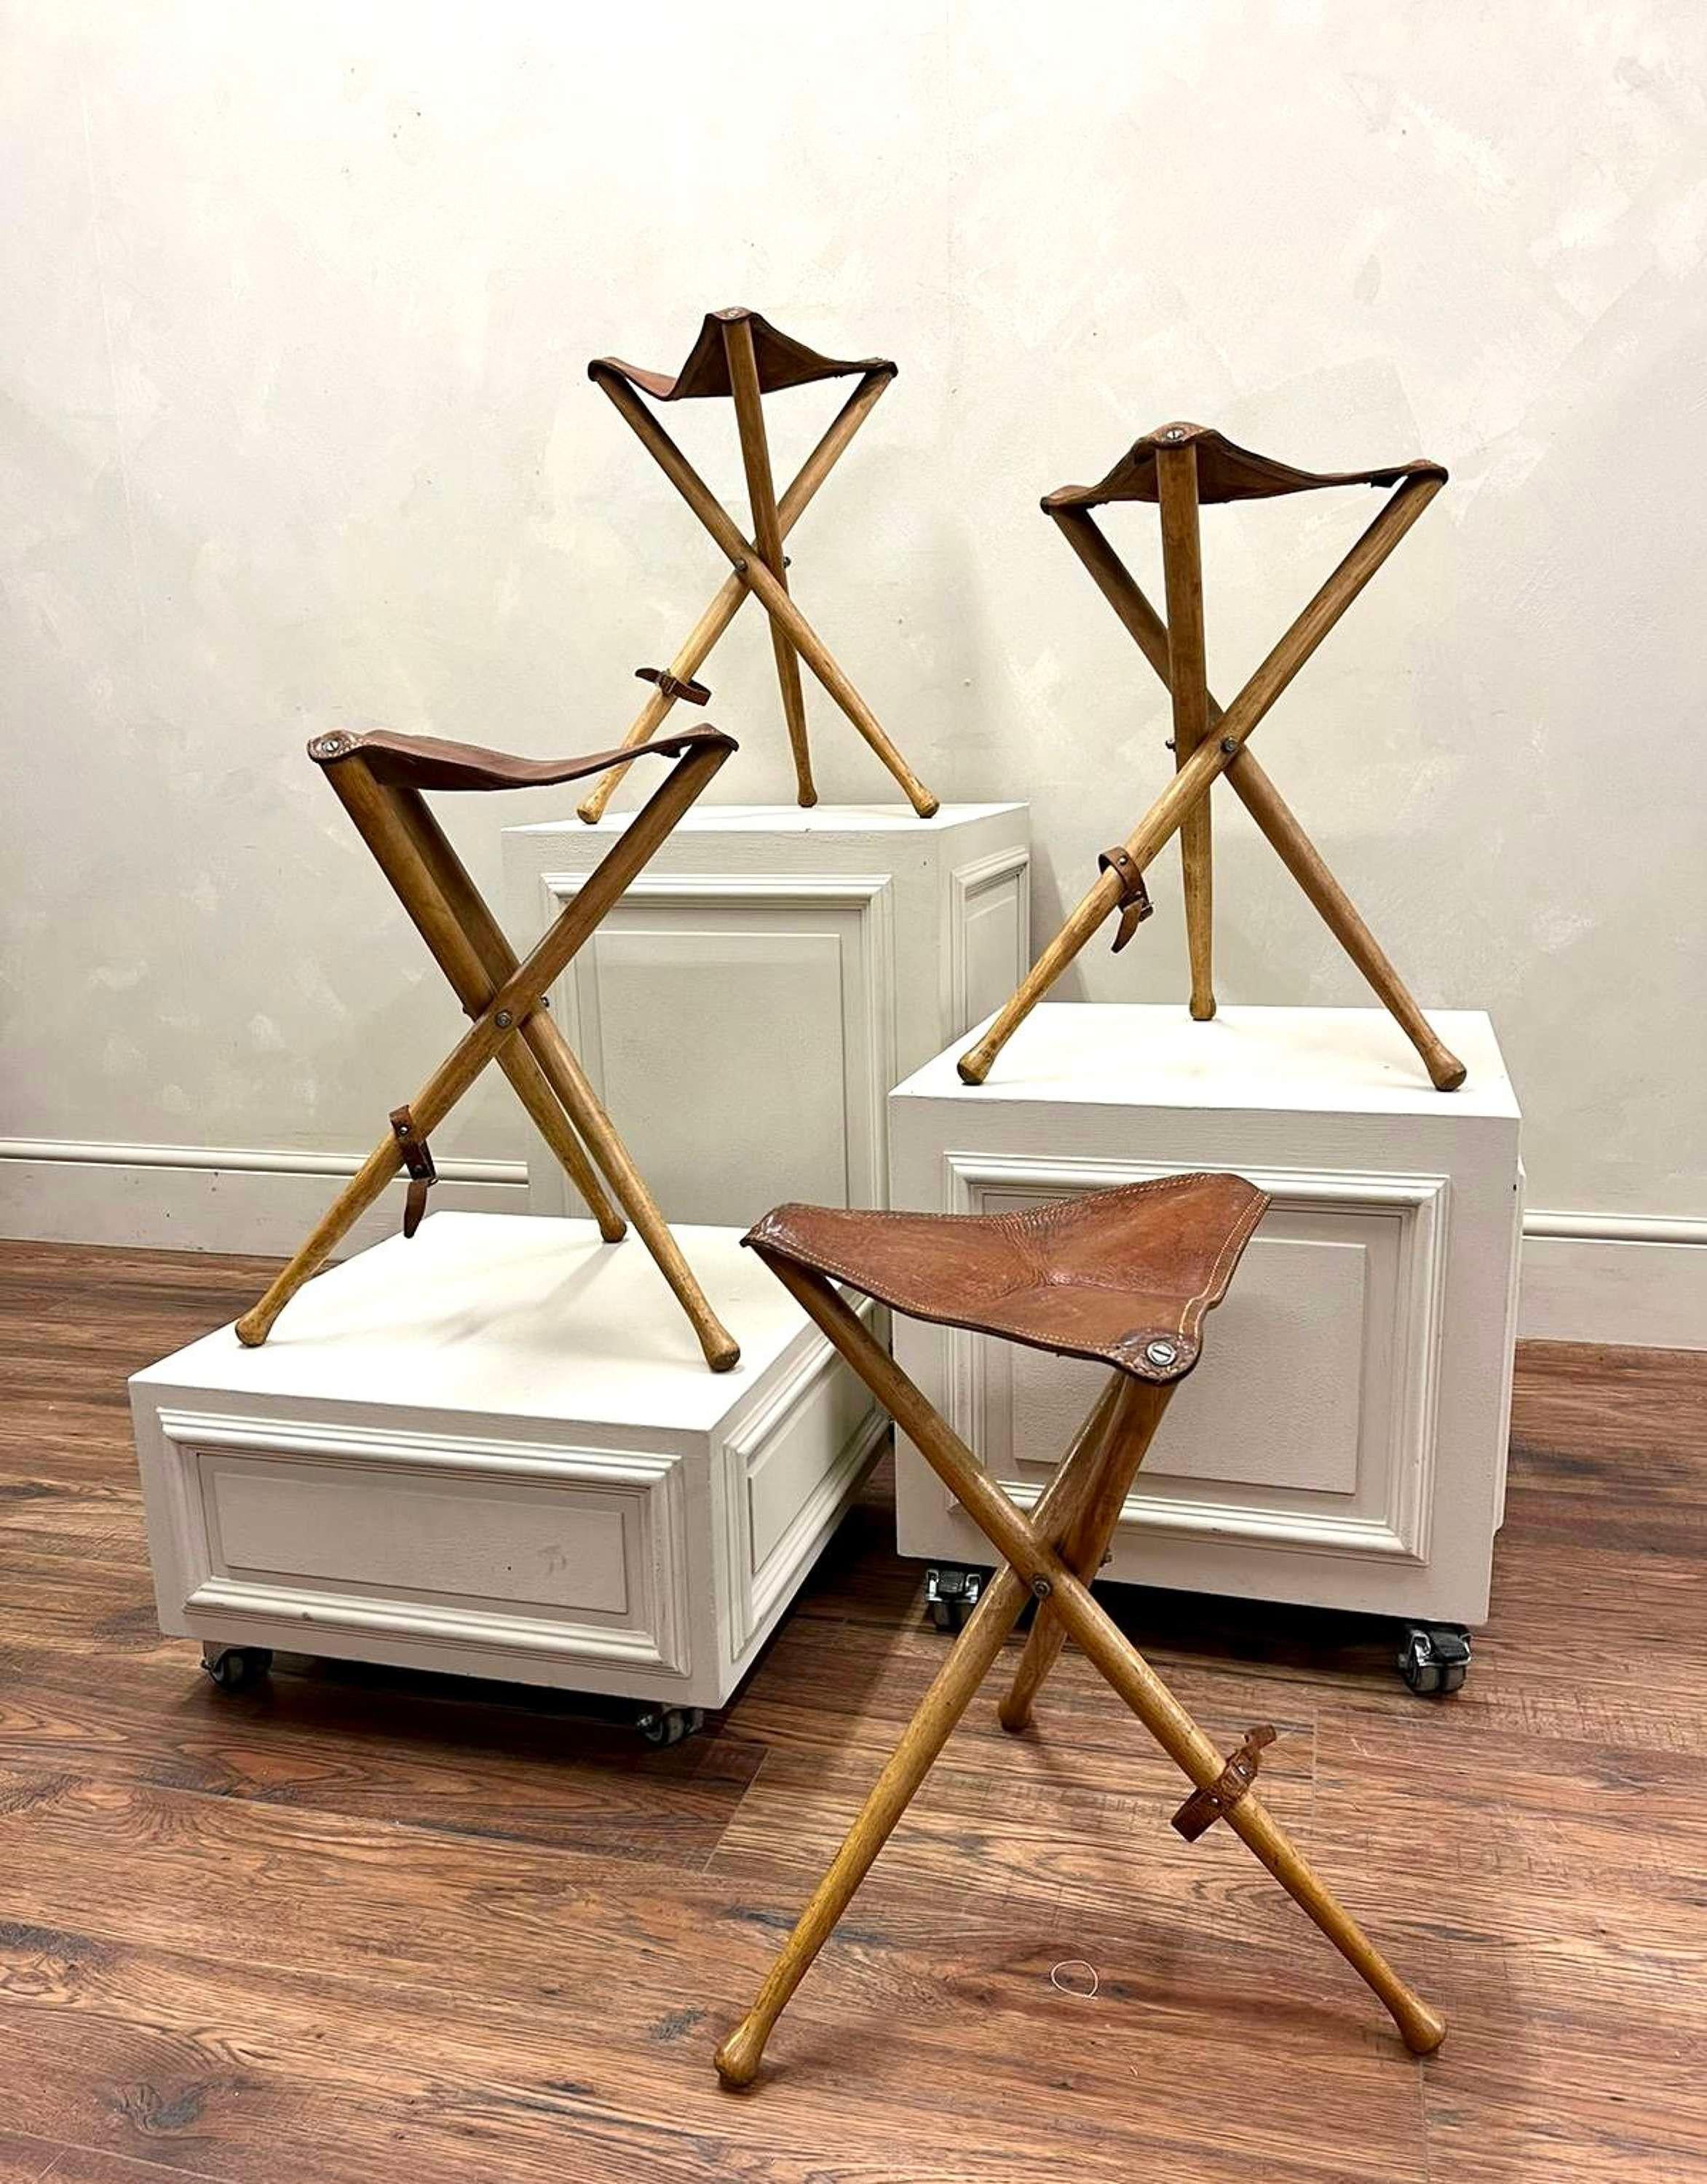 Set of 4, attractive beech and tan leather shoot stools.
Tripod construction with easy-fold, secured with. leather strap.
Scandanavia, circa 1960.
Seat siz 36 x 36 x 36 cm
Dimensions:H: 50cm (19.7